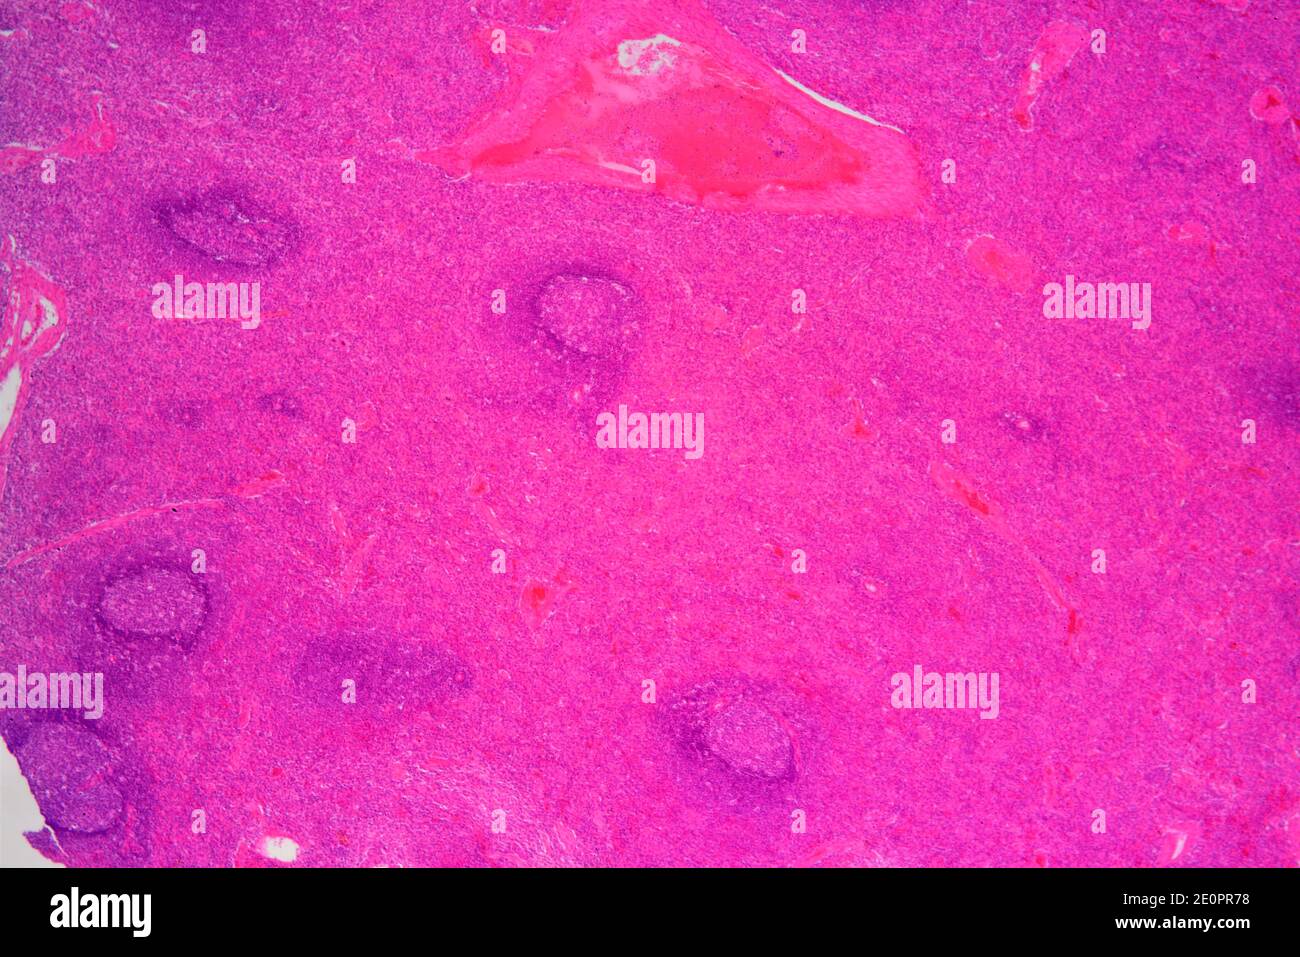 Human spleen (lymphatic organ) showing capsules, red pulp, white pulp and blood vessel. X25 at 10 cm wide. Stock Photo